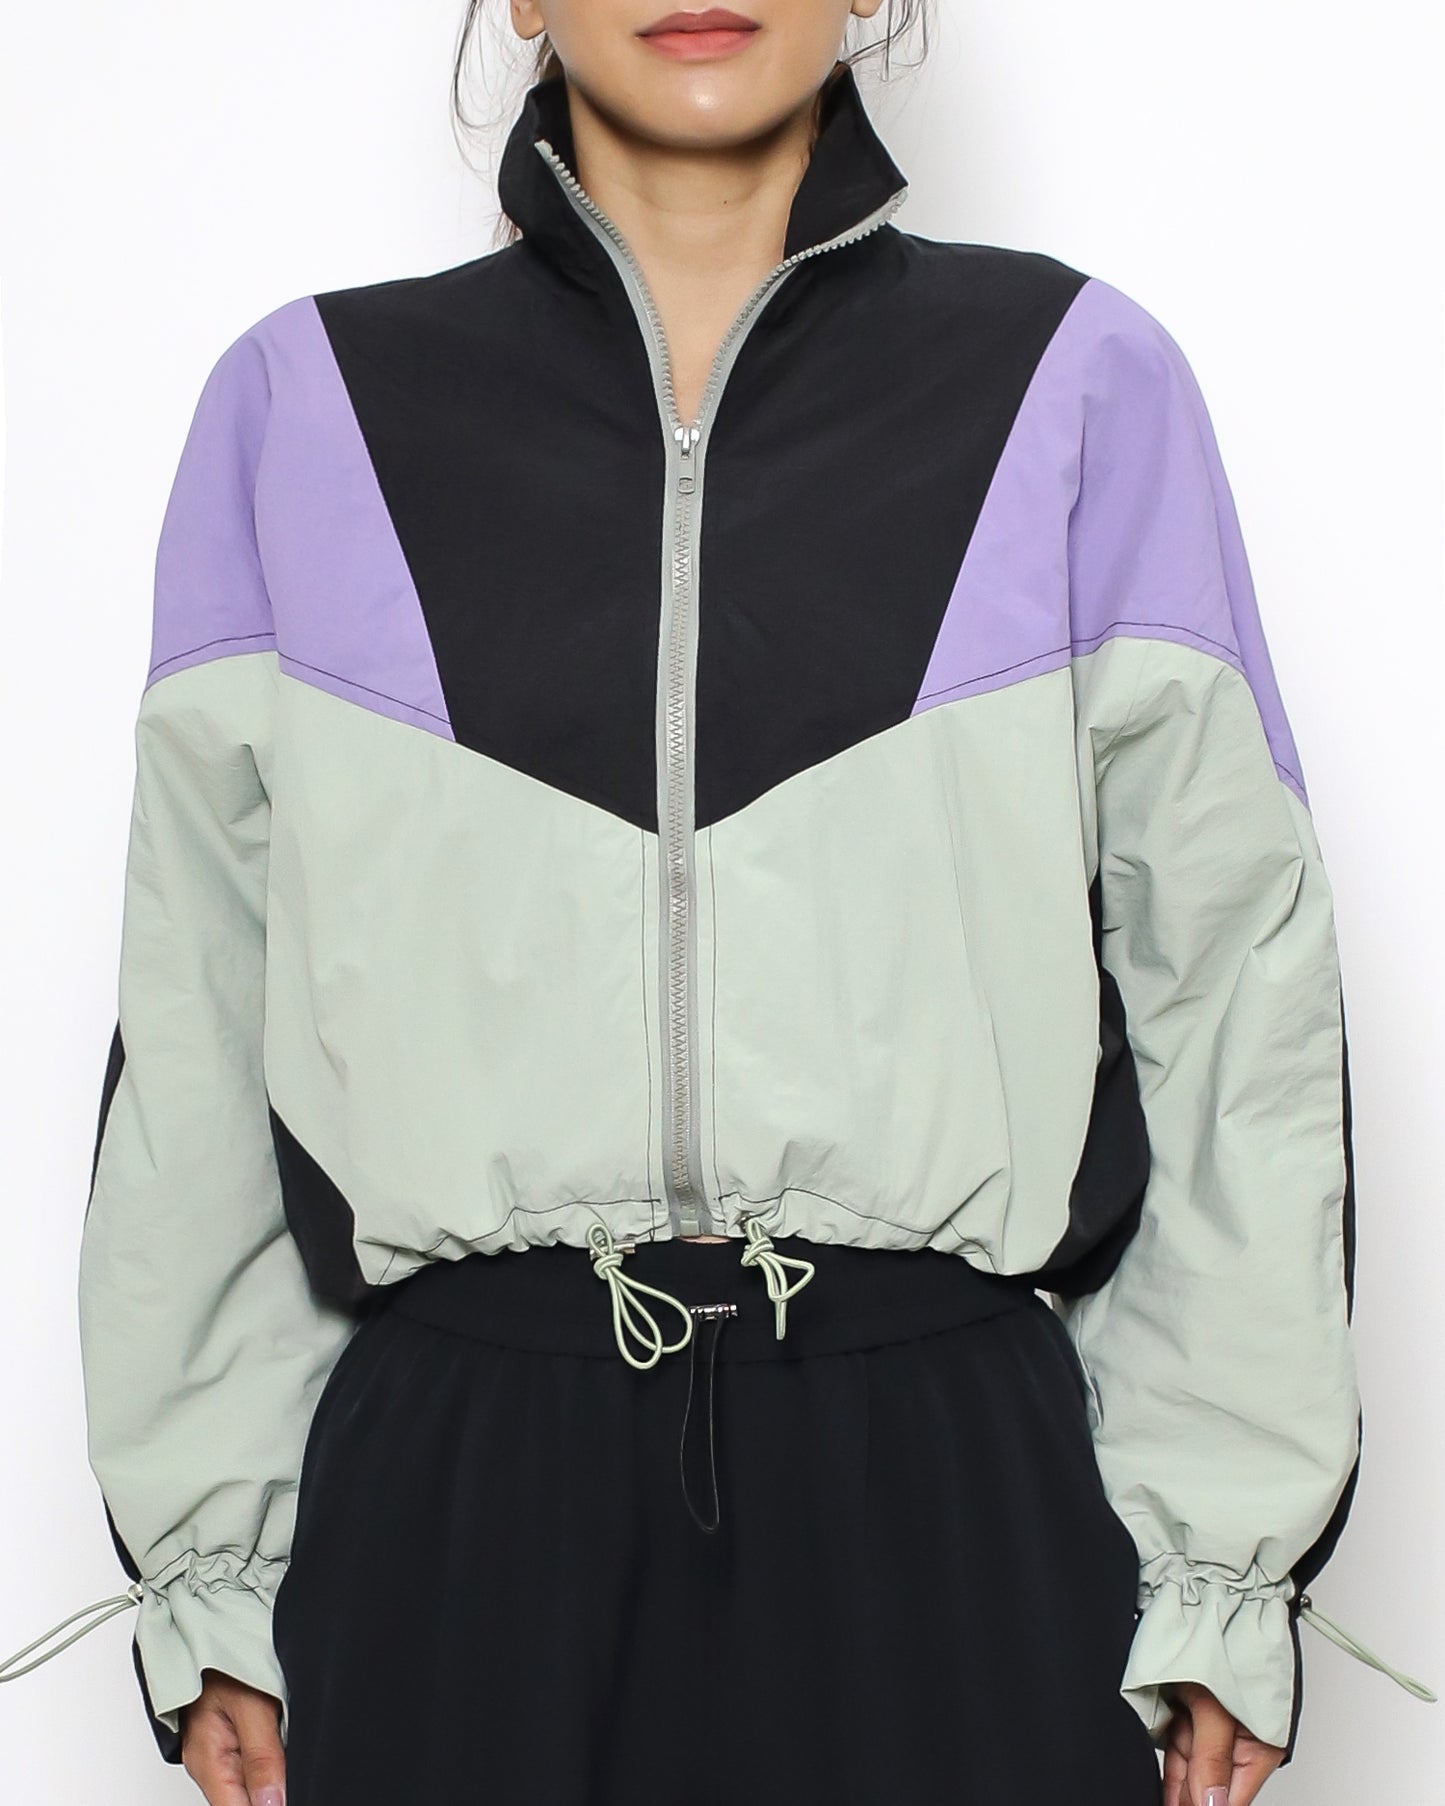 black lilac & green cropped sports jacket *pre-order*